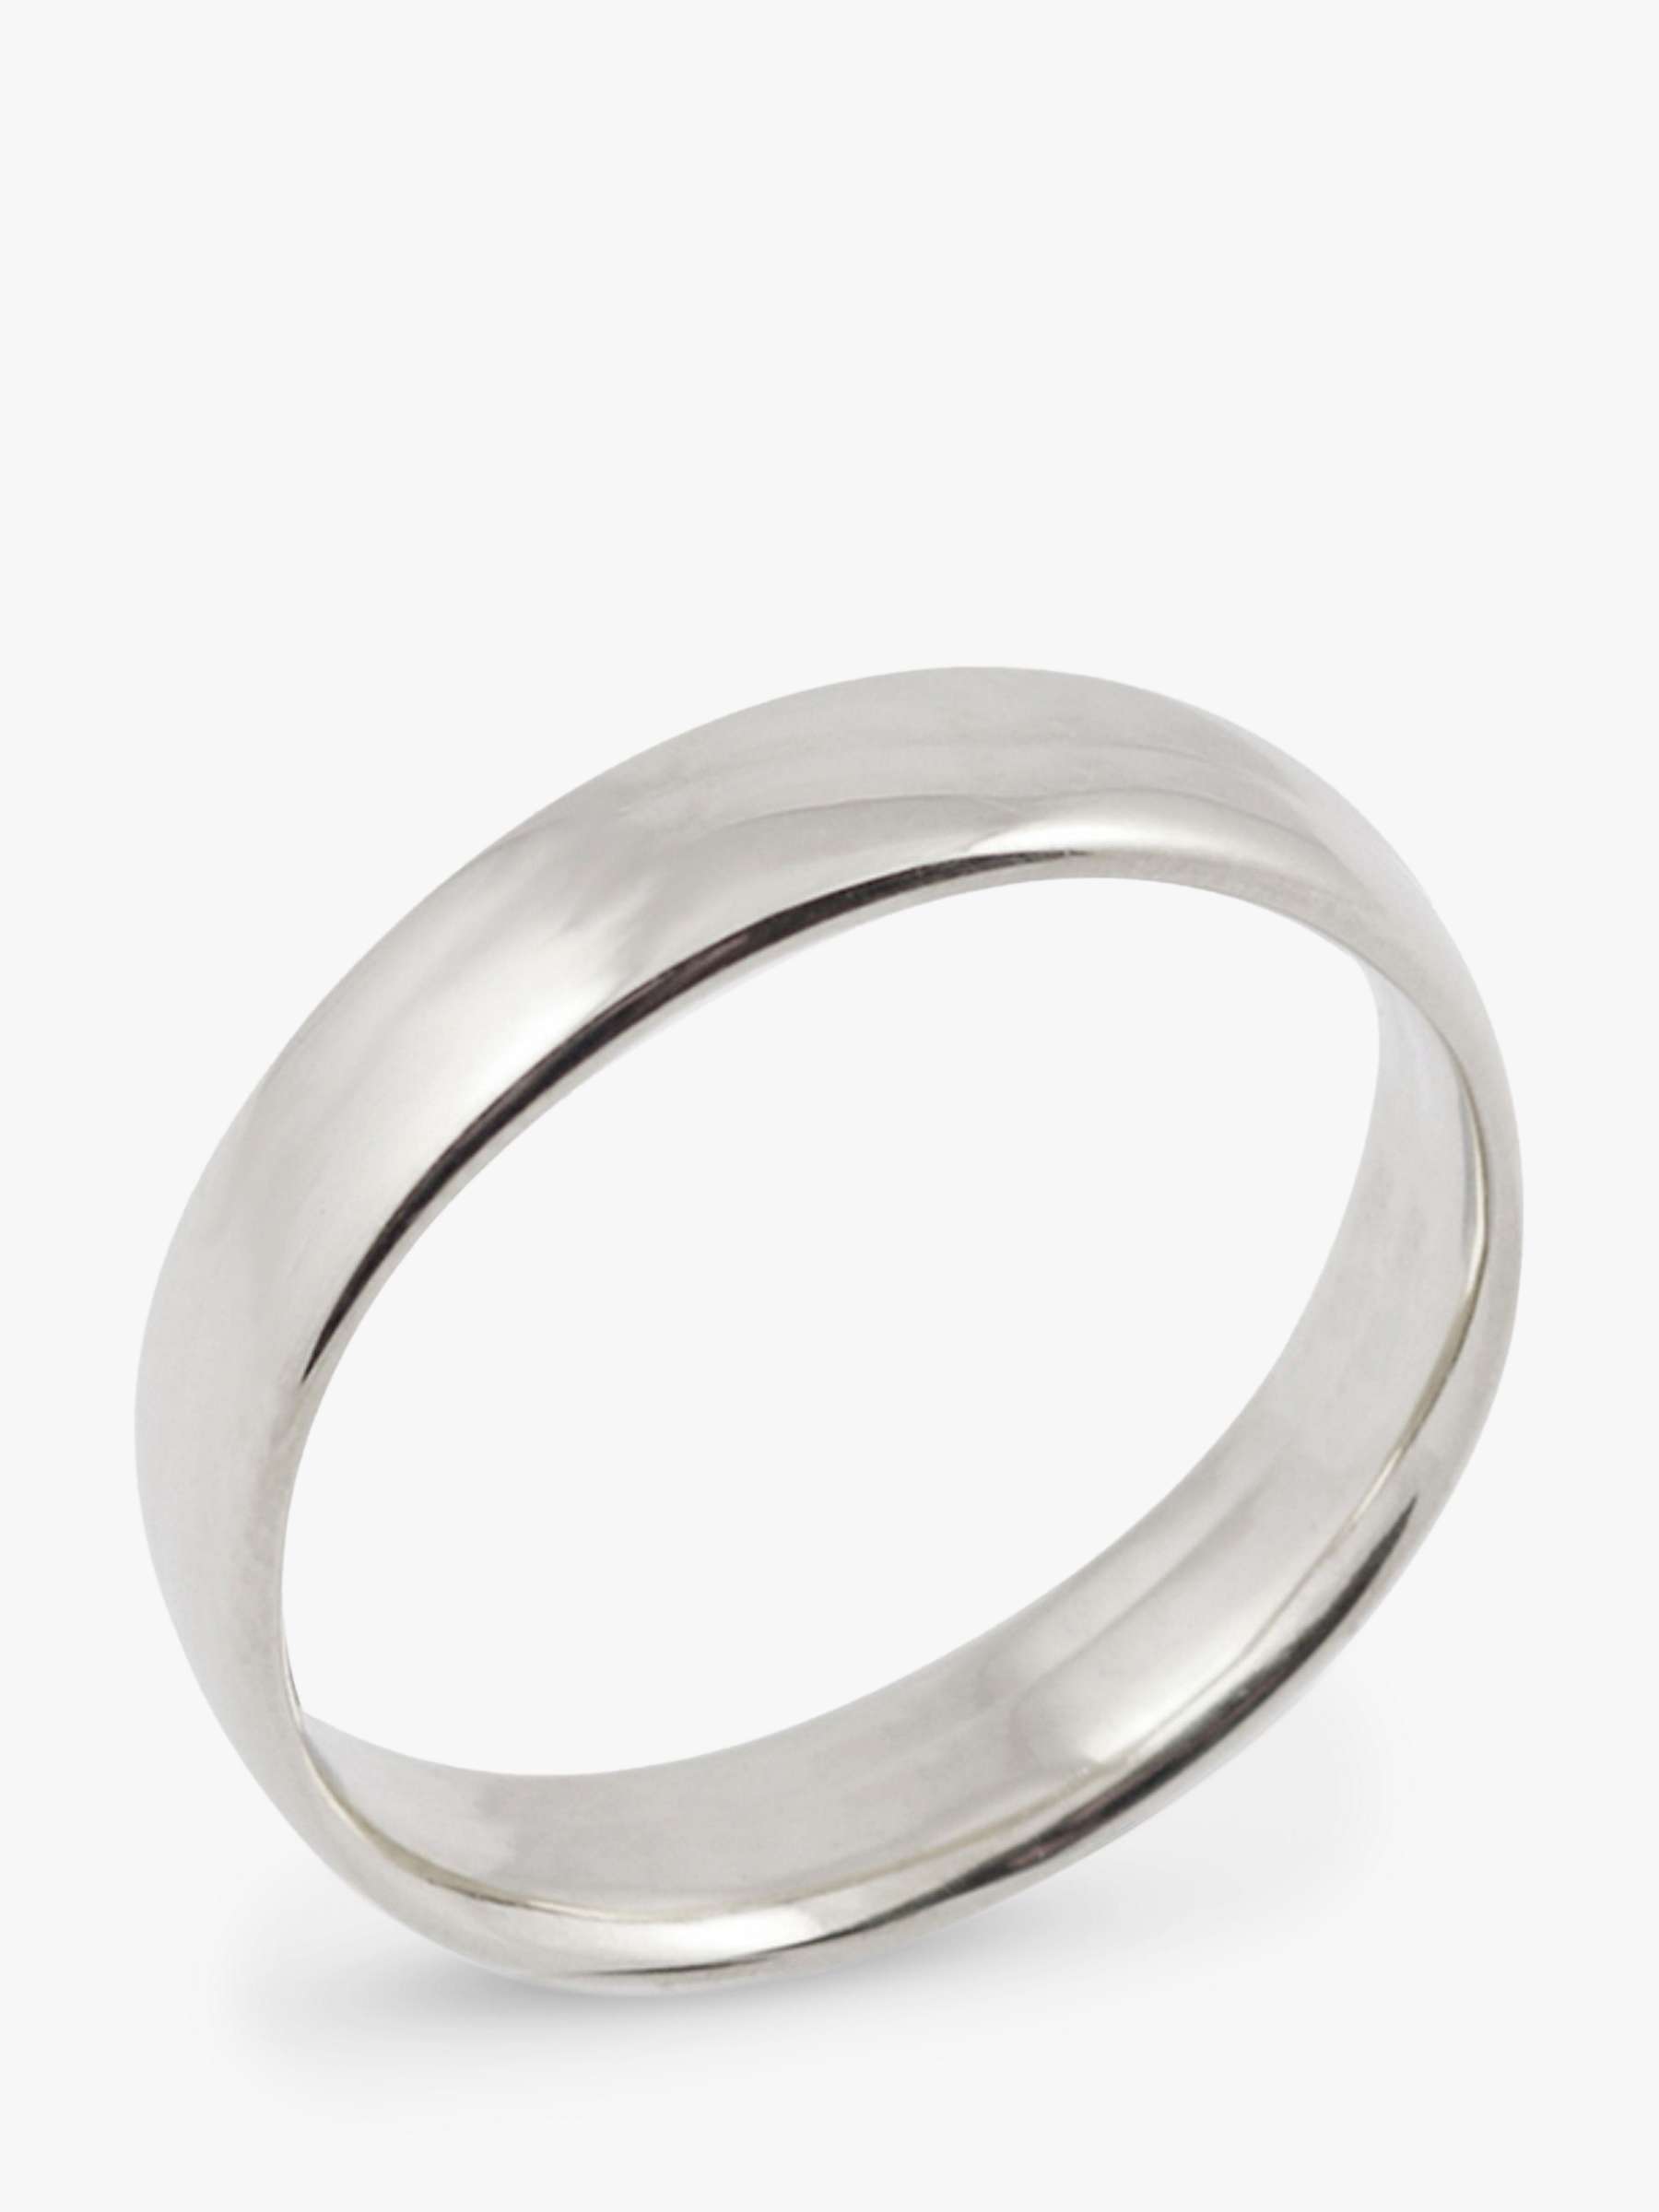 Buy E.W Adams 18ct White Gold 5mm Larger Sized Court Wedding Ring, White Gold Online at johnlewis.com